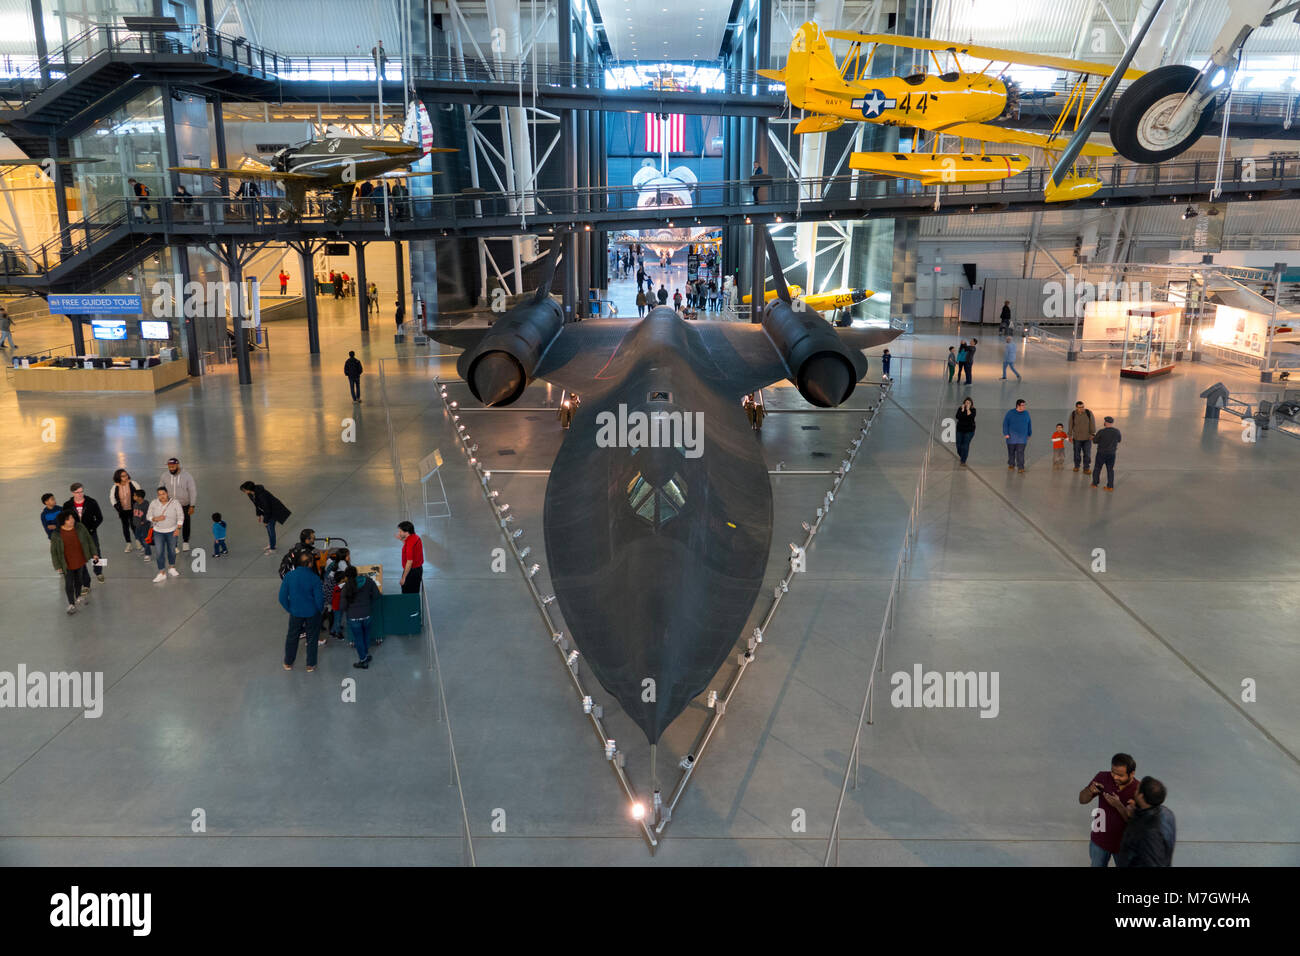 Steven F Udvar Hazy Center Smithsonian Air and Space Museum à Dulles Airport Chantilly Virginia interior Banque D'Images